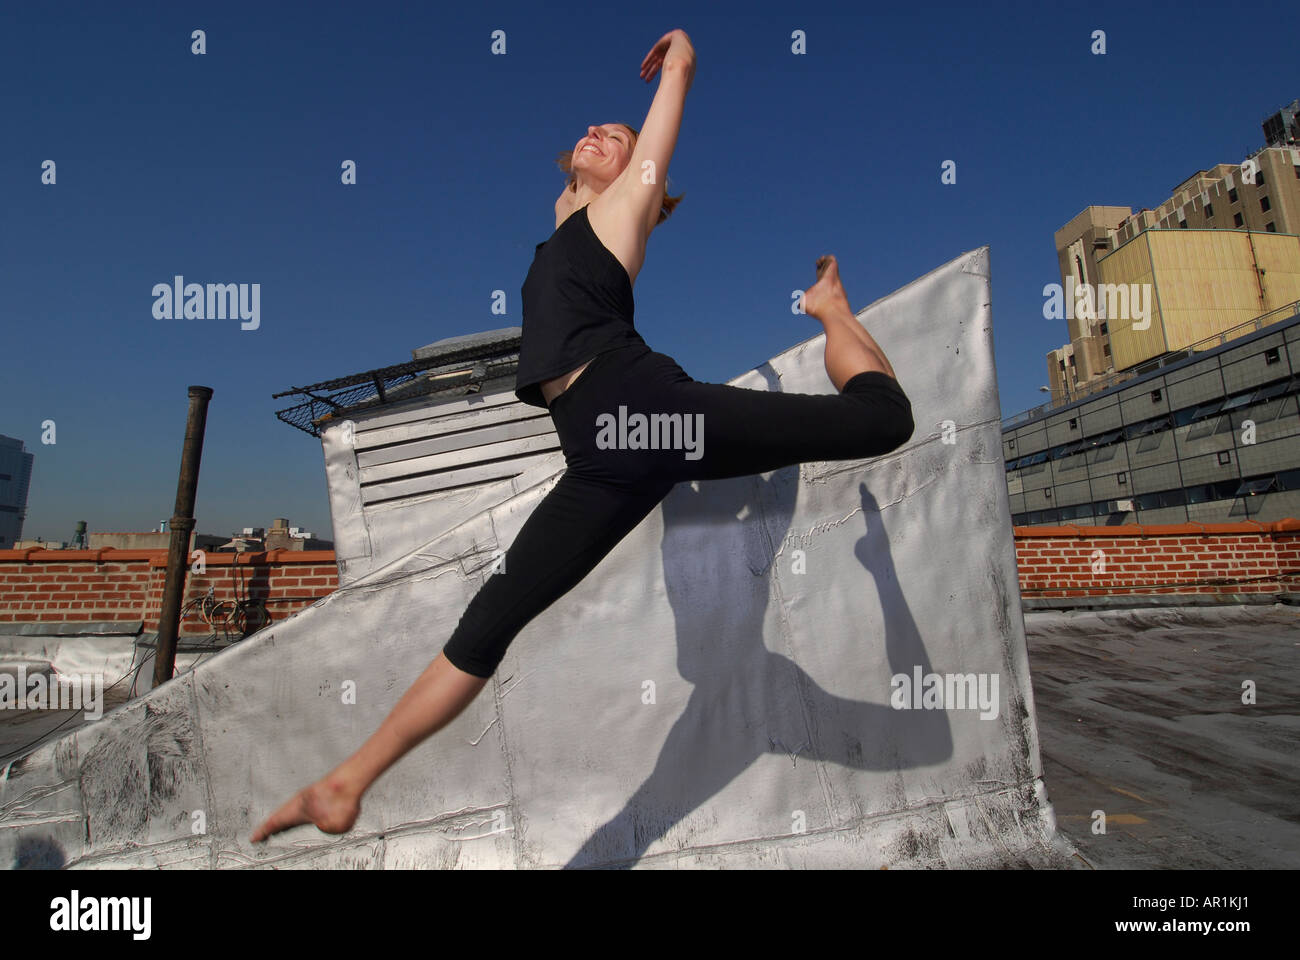 Model released New York CIty Thirty years old blond woman dancing on a building roof in a sunny morning in mid town Manhattan ex Stock Photo